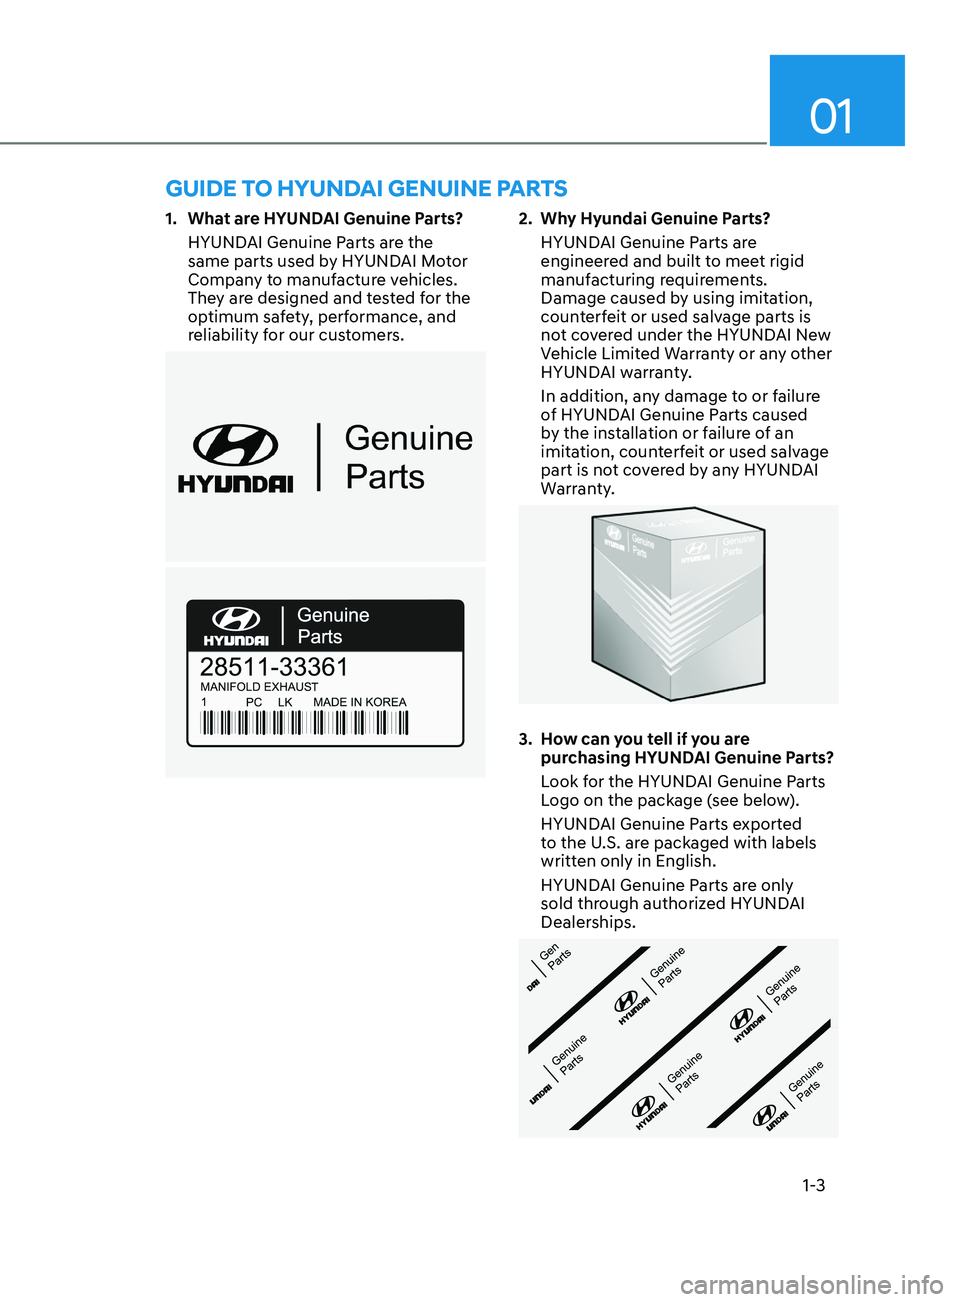 HYUNDAI SONATA 2022  Owners Manual 01
1-3
1. What are HYUNDAI Genuine Parts?HYUNDAI Genuine Parts are the 
same parts used by HYUNDAI Motor 
Company to manufacture vehicles. 
They are designed and tested for the 
optimum safety, perfor